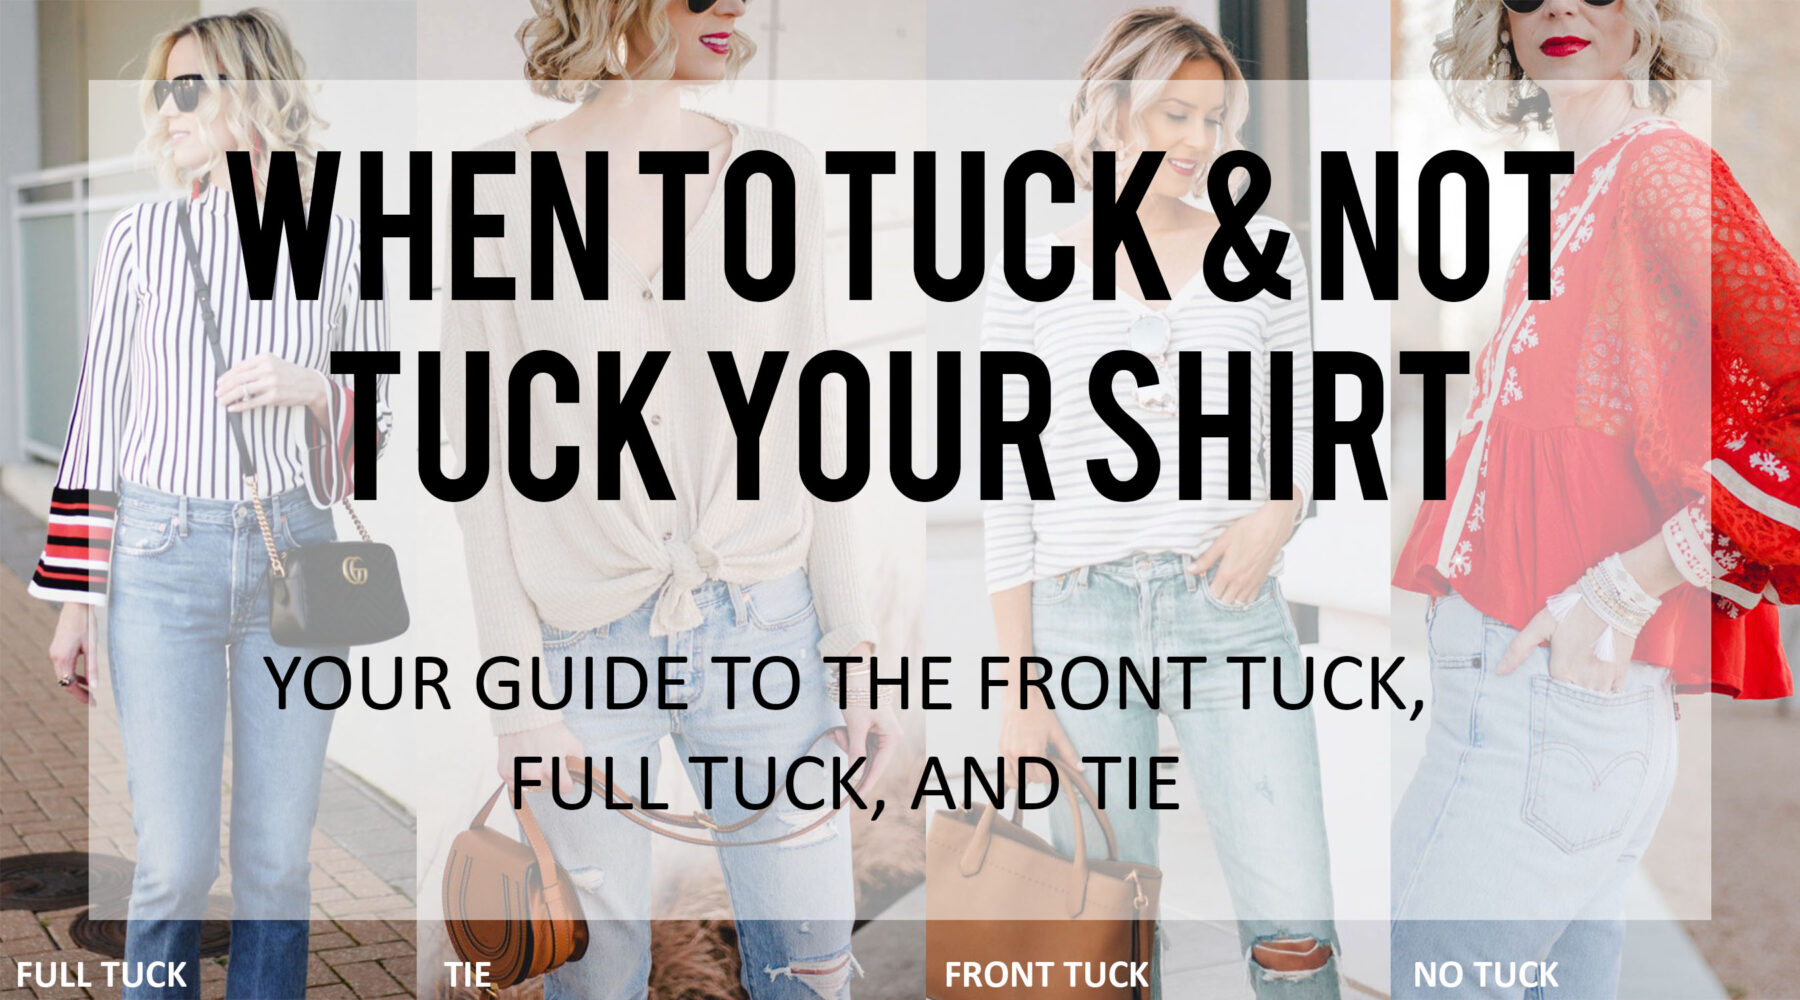 Tank-Over-T Shirt Look: The Do's and Don'ts